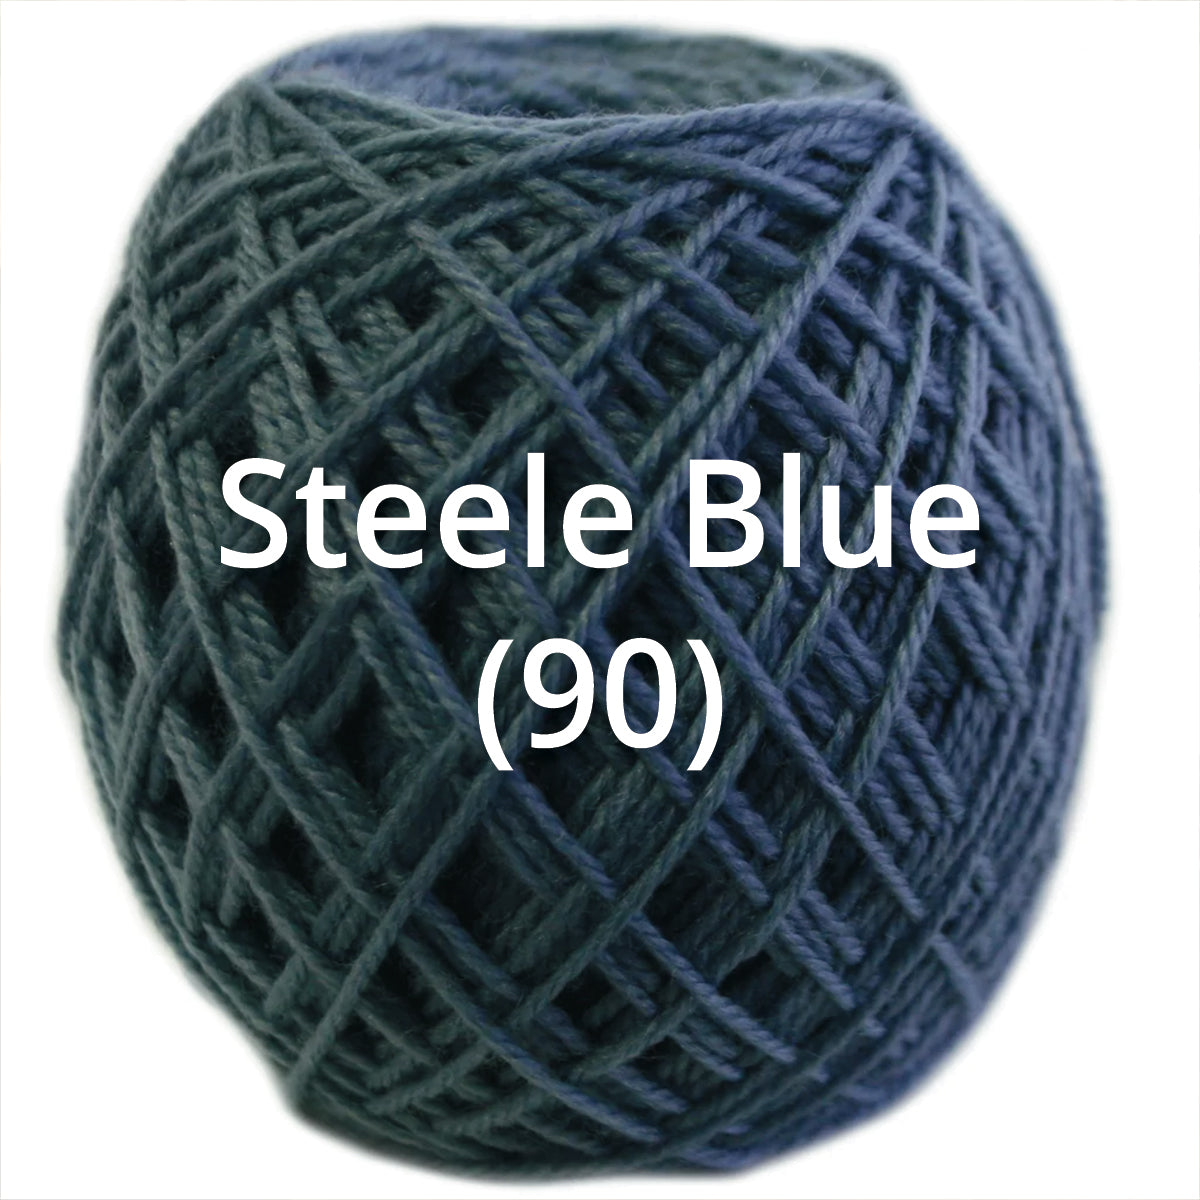 Steele Blue - Nundle Collection 4 Ply Sock Yarn